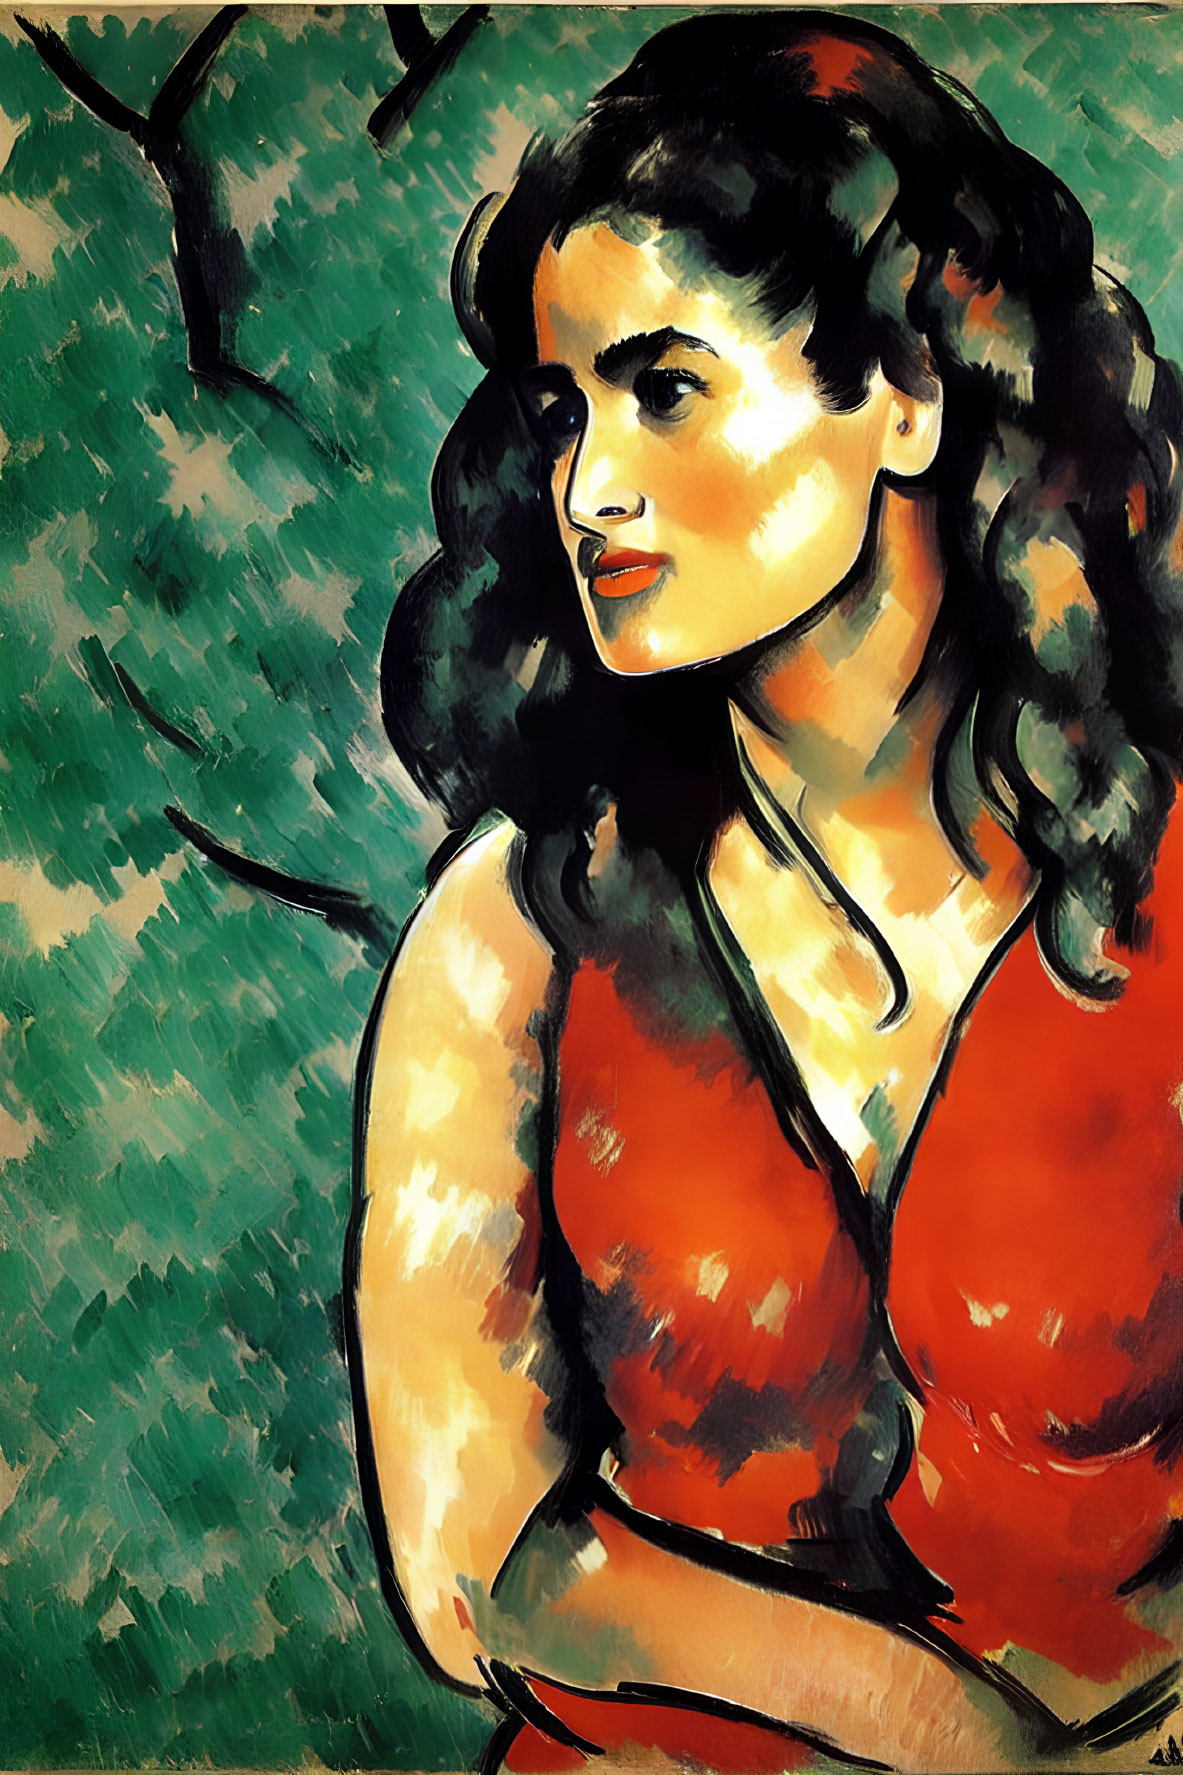 Colorful Woman Portrait in Expressionist Style with Black Hair and Red Top